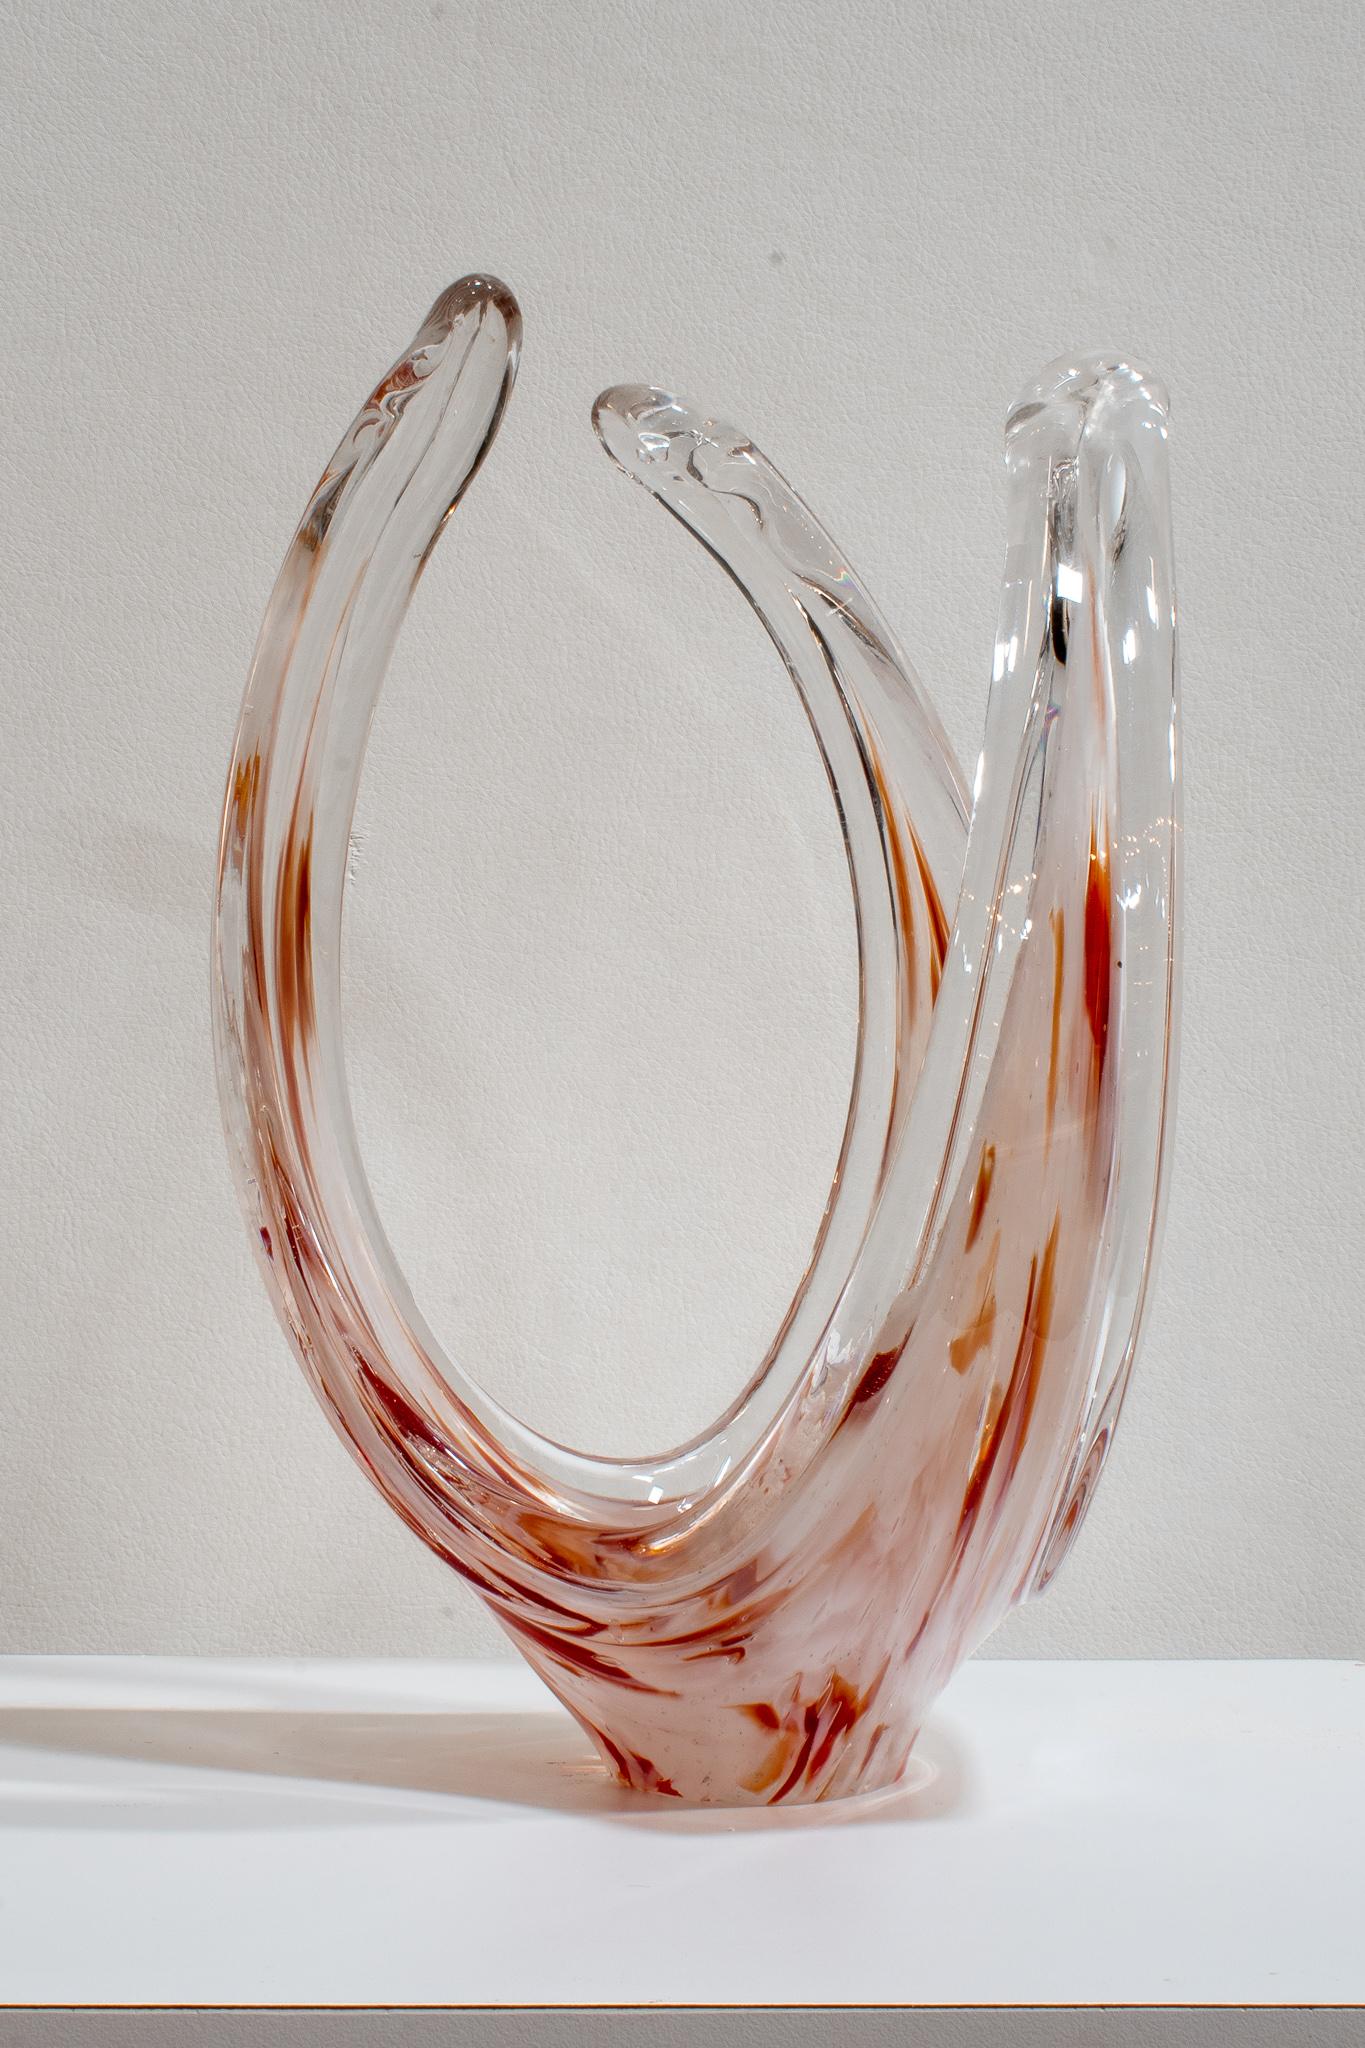 Freeform vase with shallow bowl in heavy lead glass crystal. Deep rust-red accents. Unfortunately no signature on base.